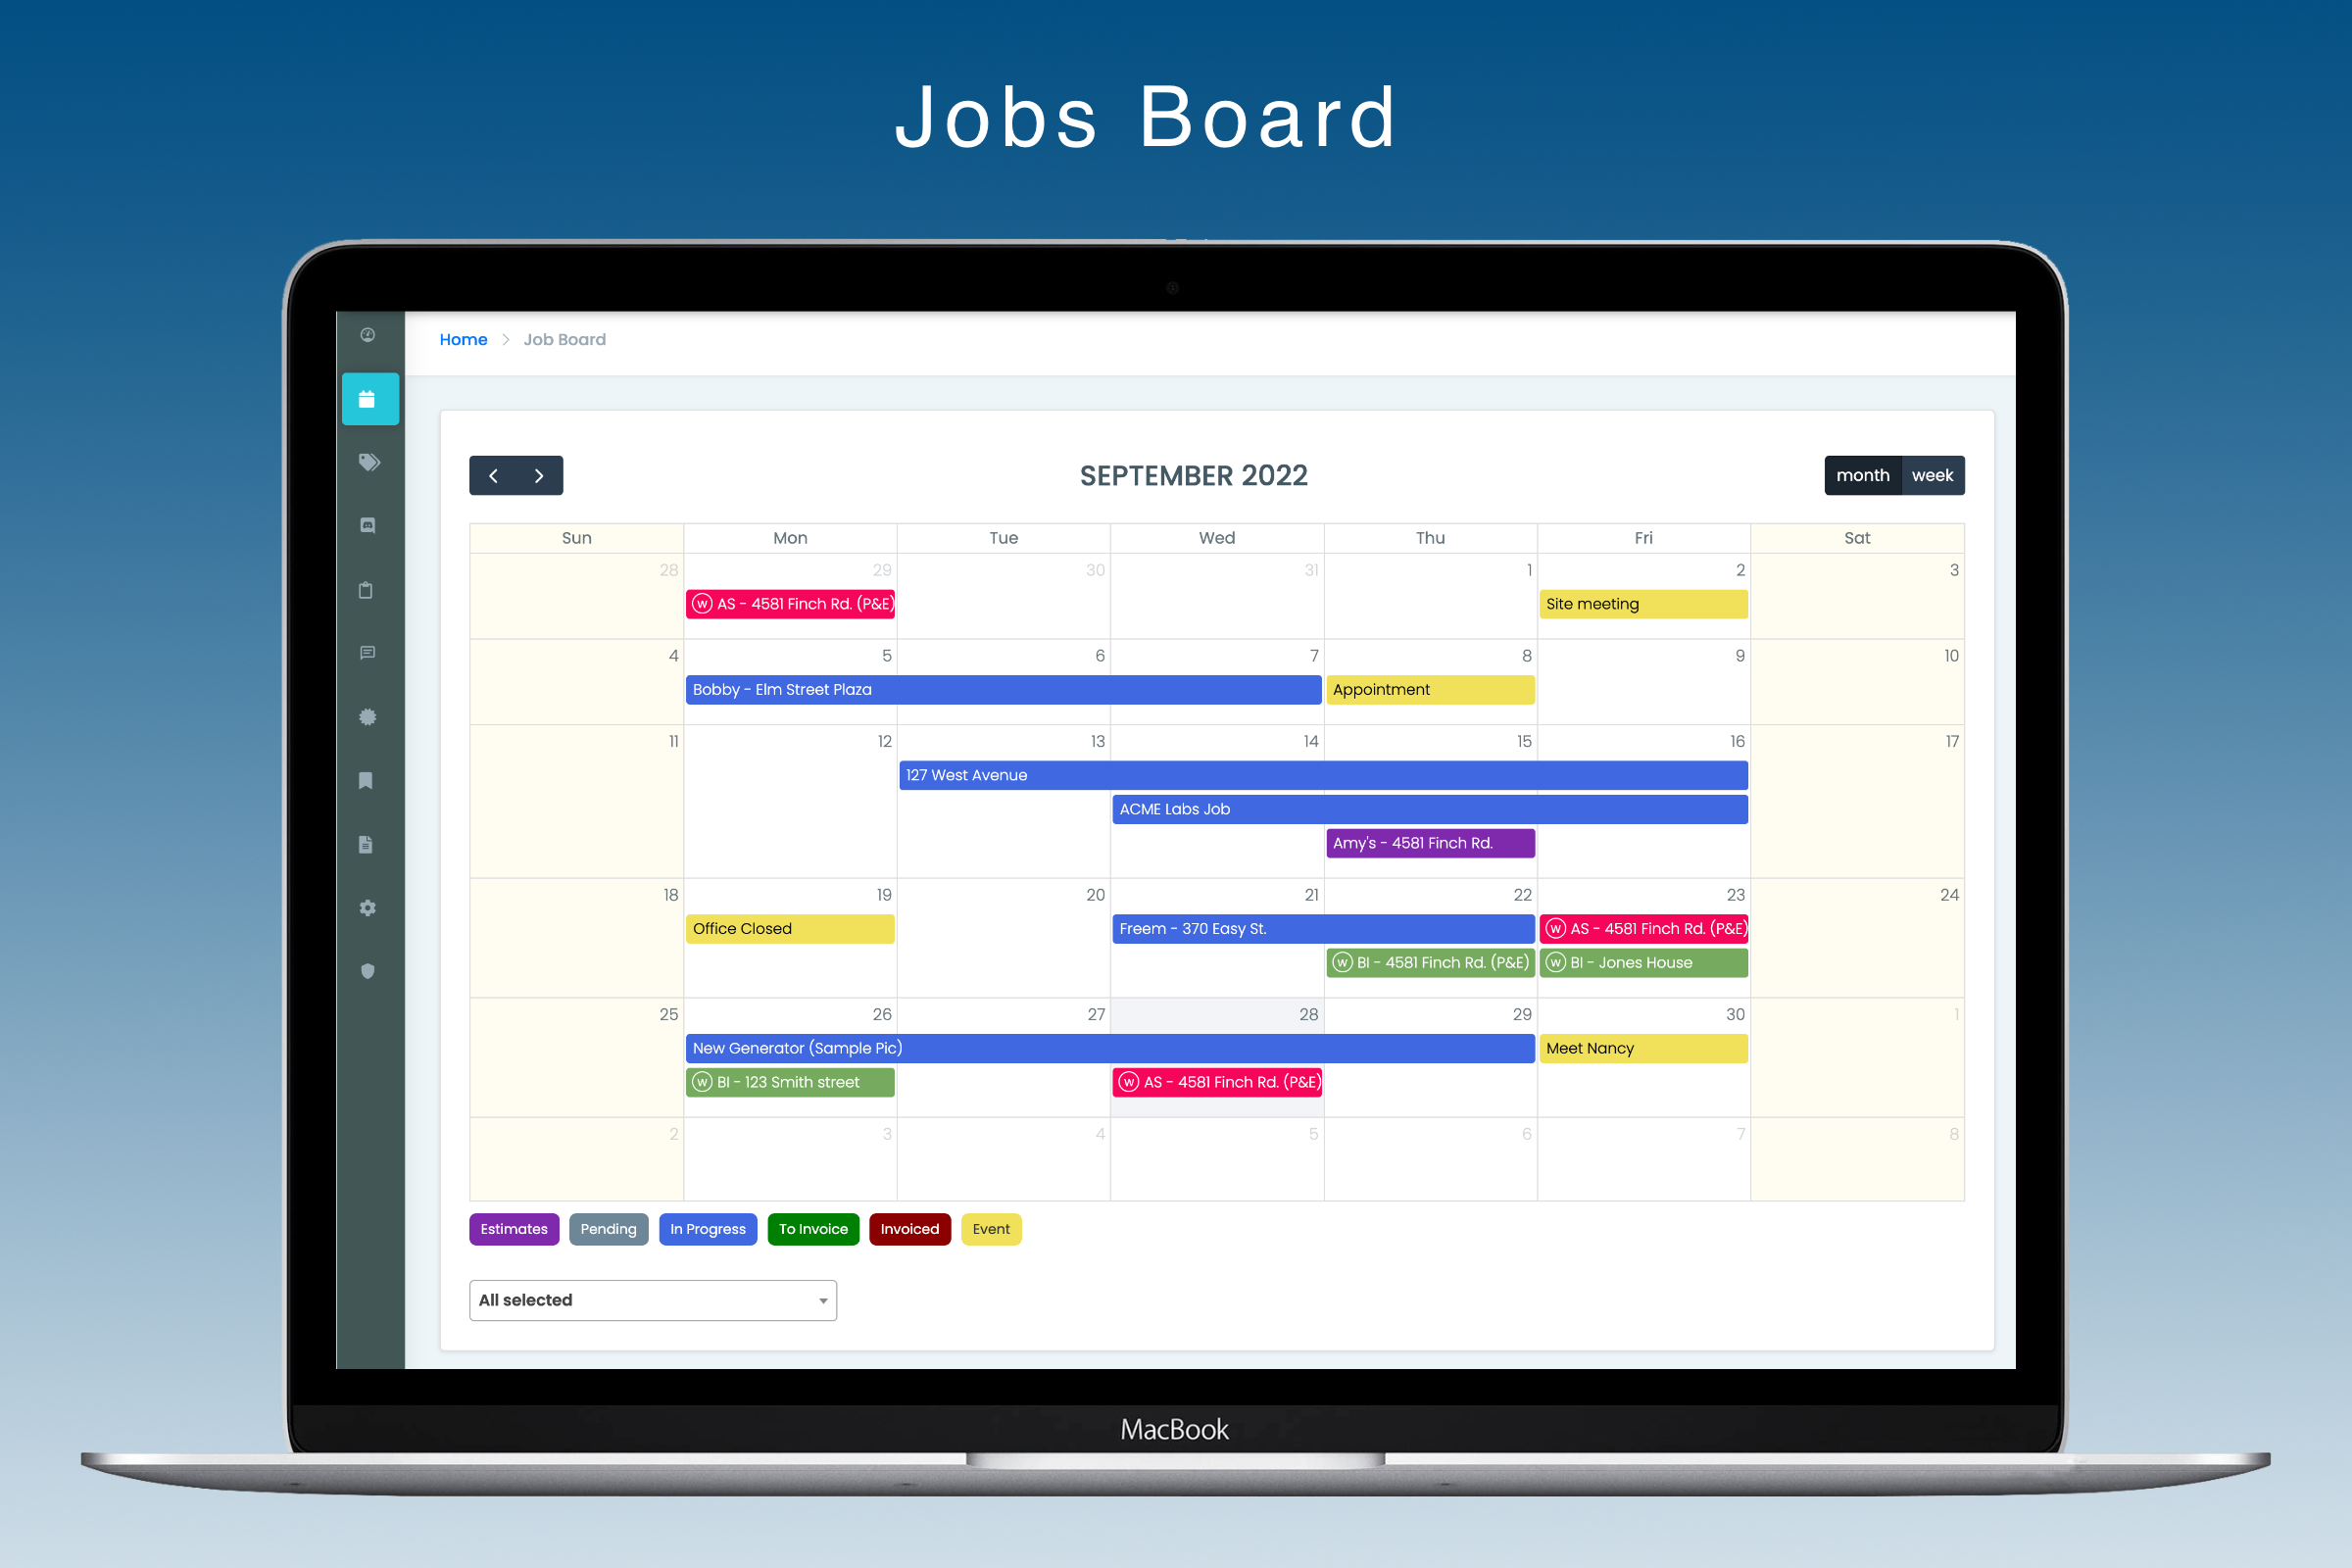 See all jobs, estimates, leads, work orders and purchase orders in one place.   Supports drag and drop to change dates.  Create appointments and tasks.